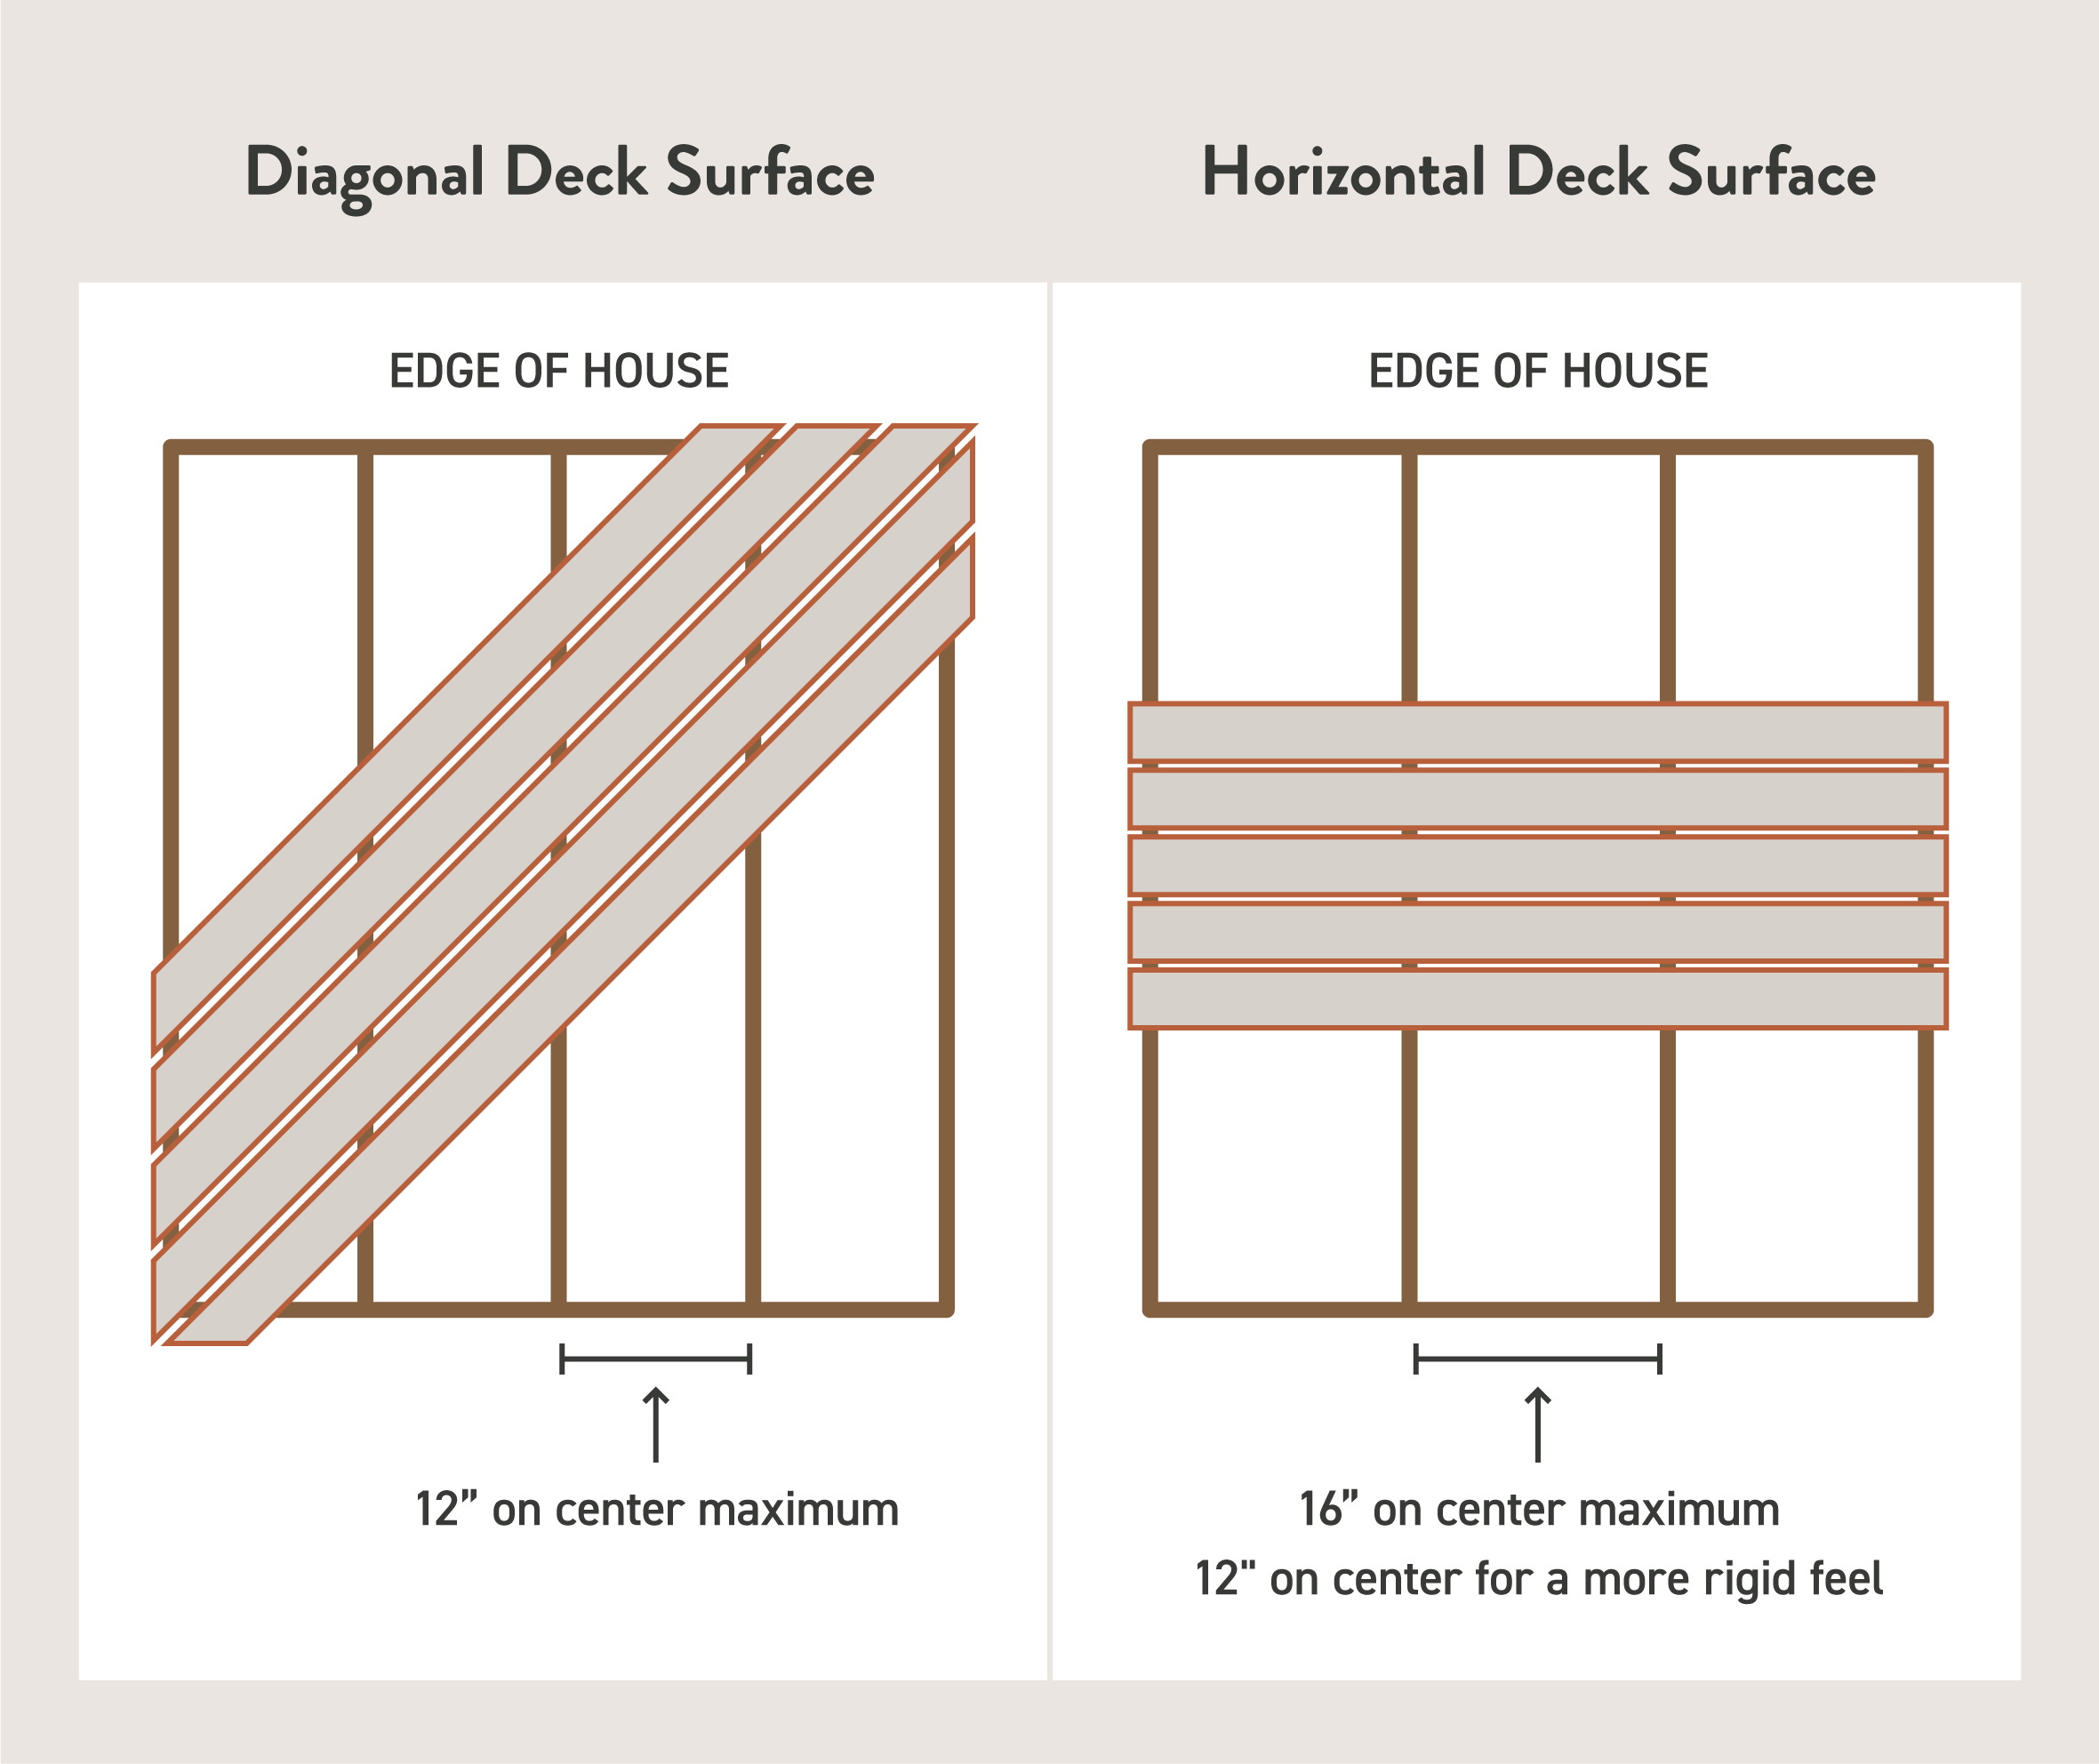 Diagrams show diagonal and horizontal decking side-by-side noting proper joist spacing for each.